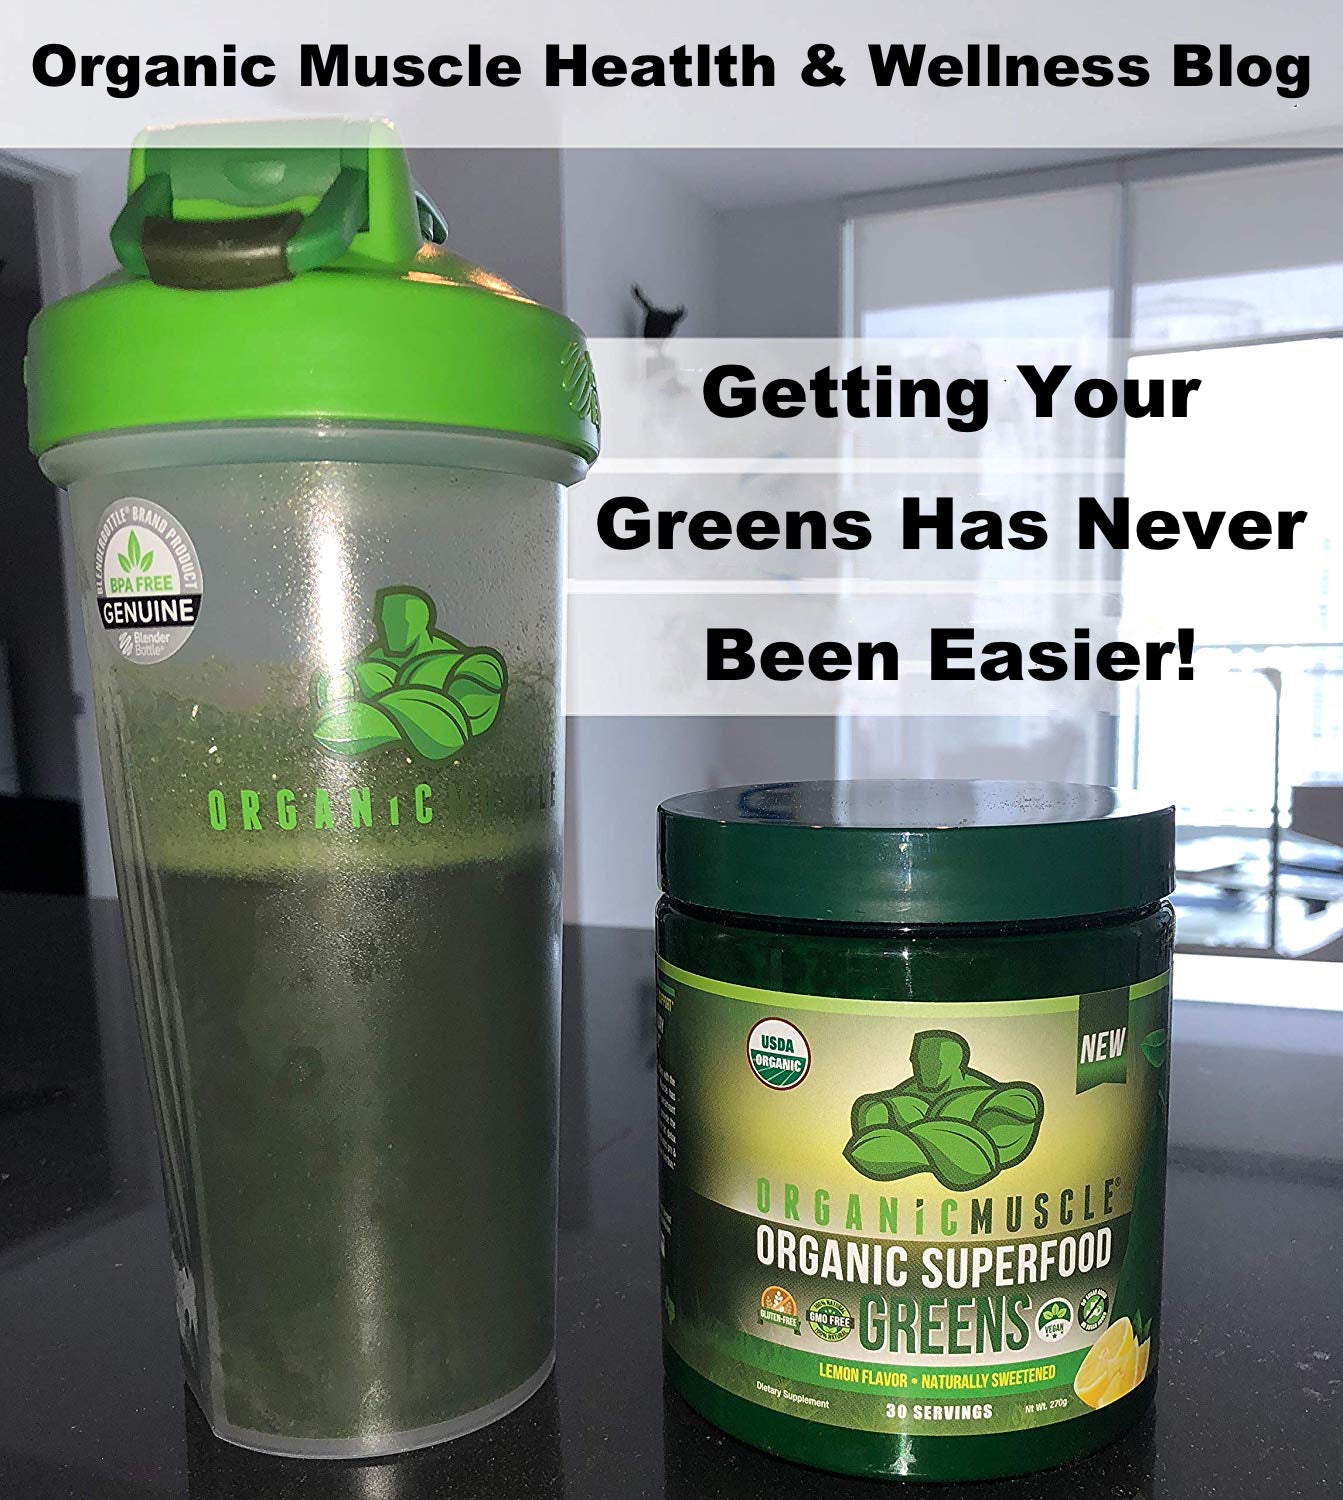 Getting Your Greens Has Never Been Easier! - Organic Muscle Fitness Supplements